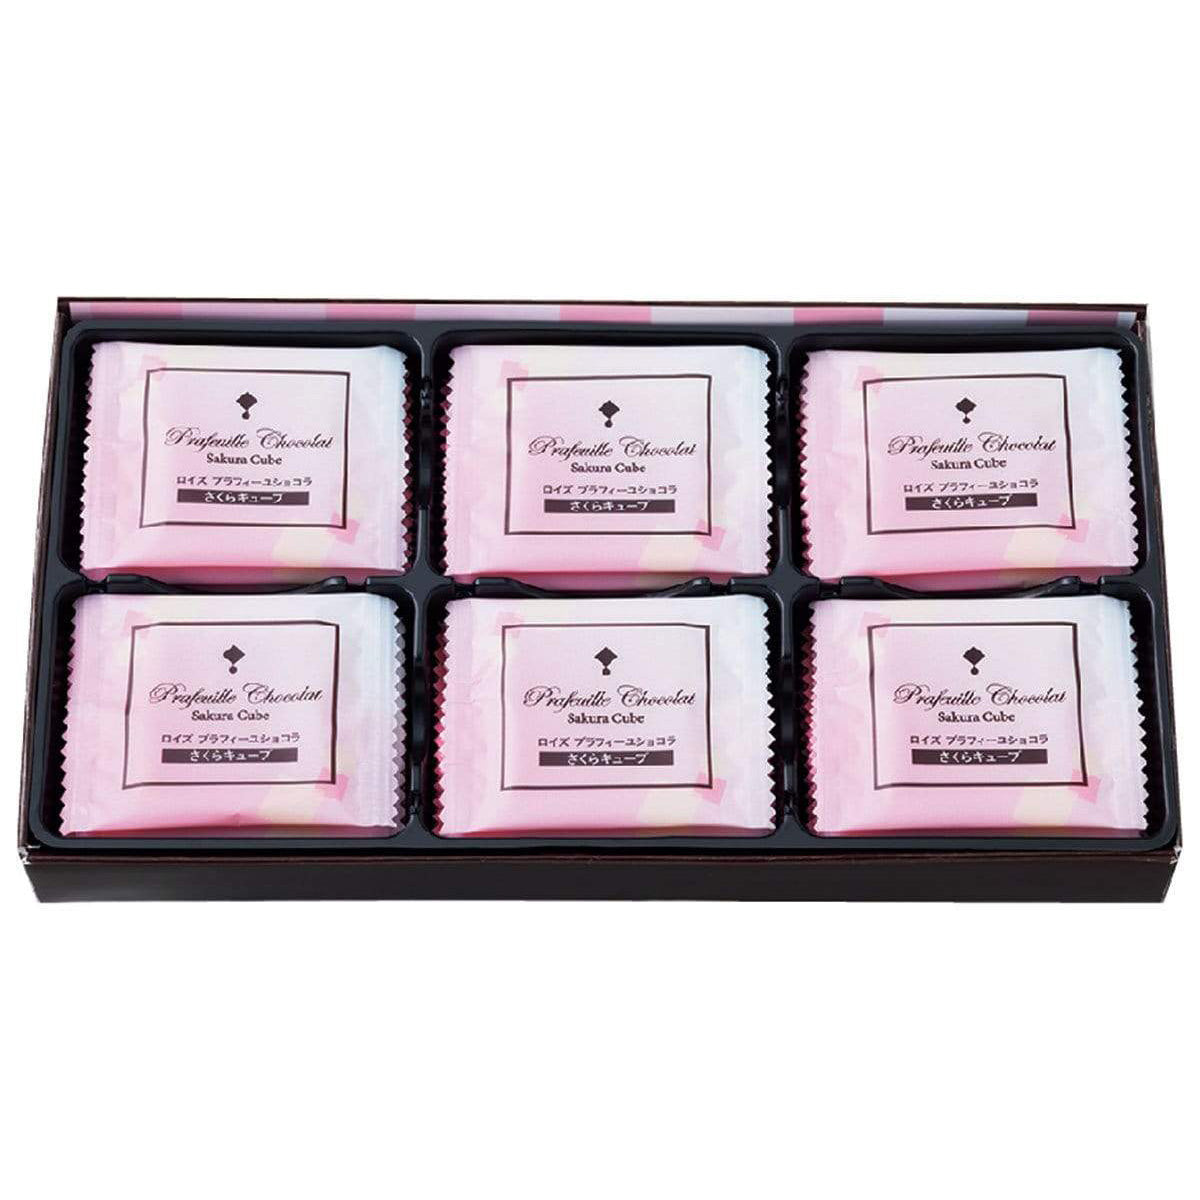 ROYCE' Chocolate - Prafeuille Chocolat "Sakura Cube" - Image shows a box filled with individually-wrapped chocolates with pink wrapping. Text says Prafeuille Chocolat Sakura Cube.